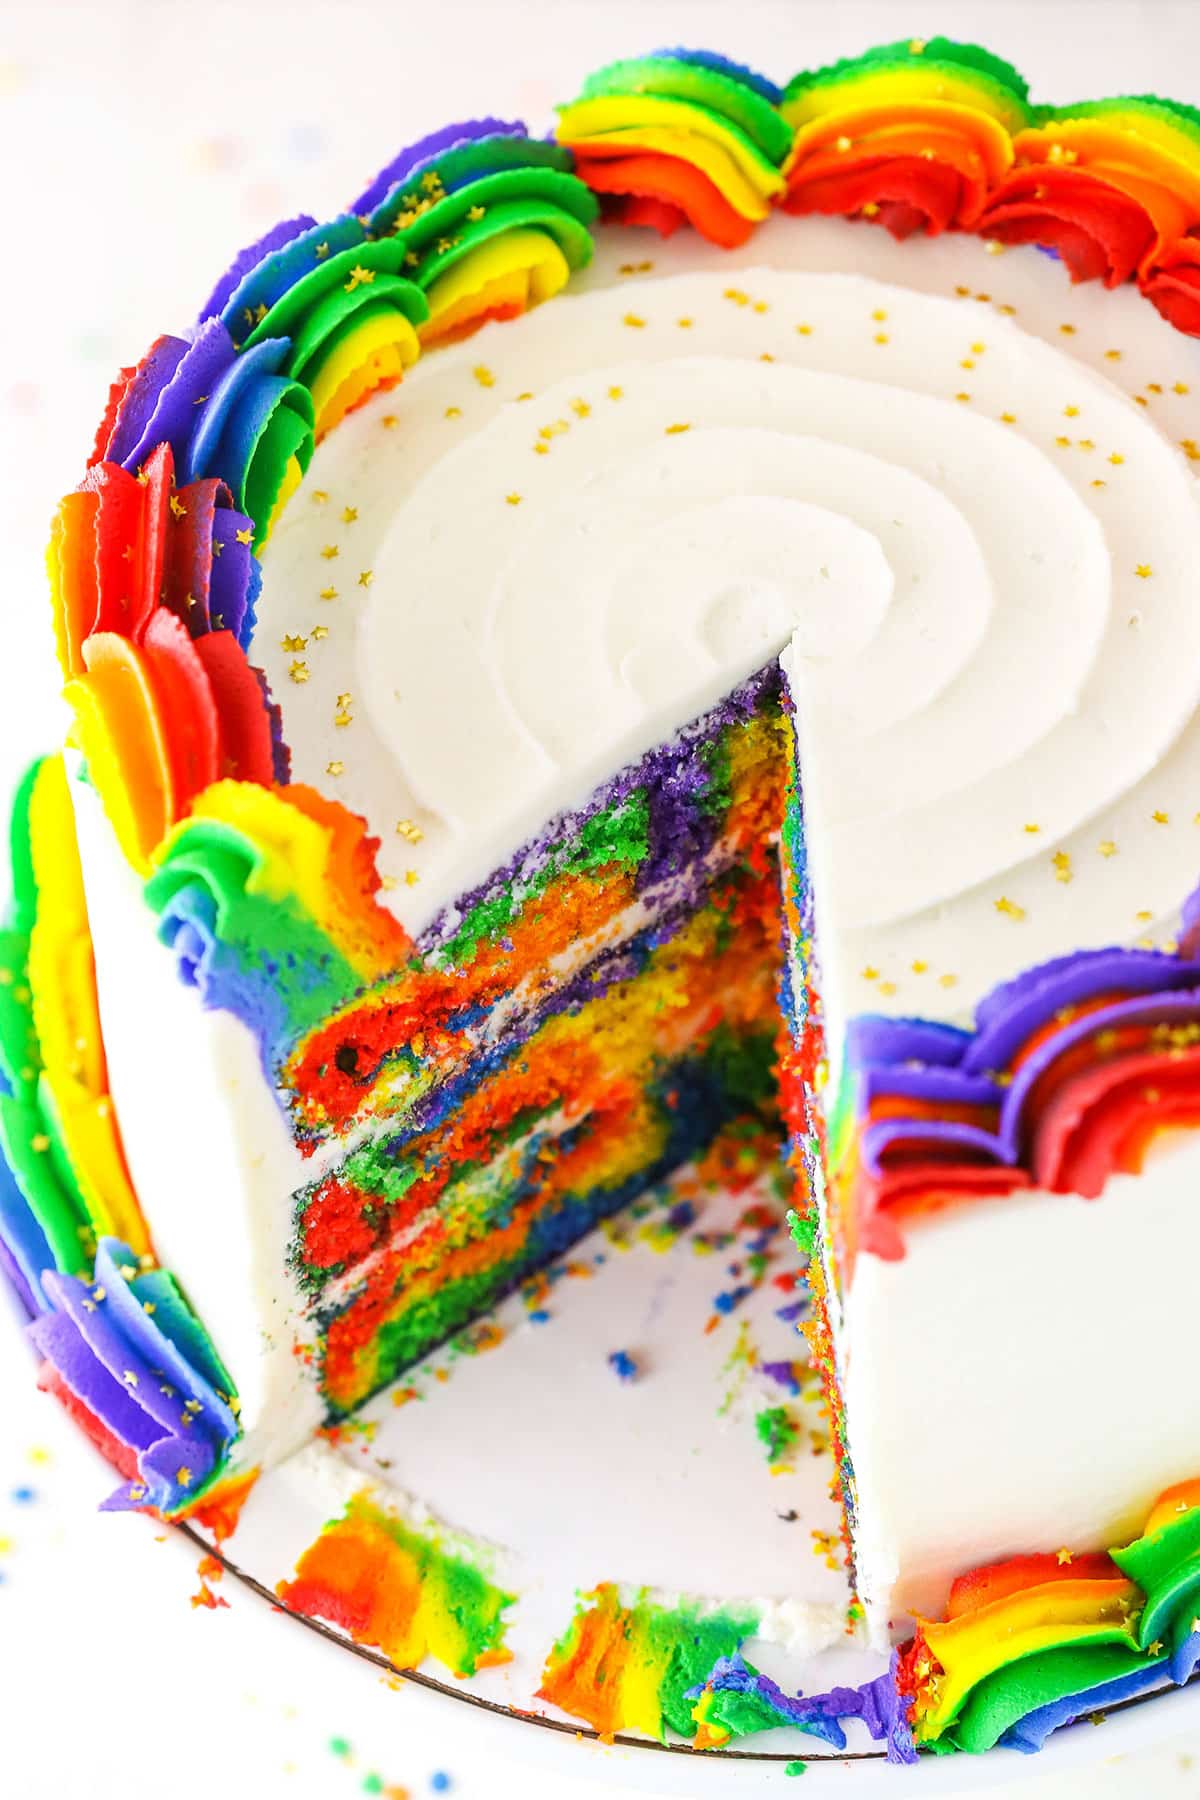 A Rainbow Swirl Cake with a slice removed showing the colorful internal layers